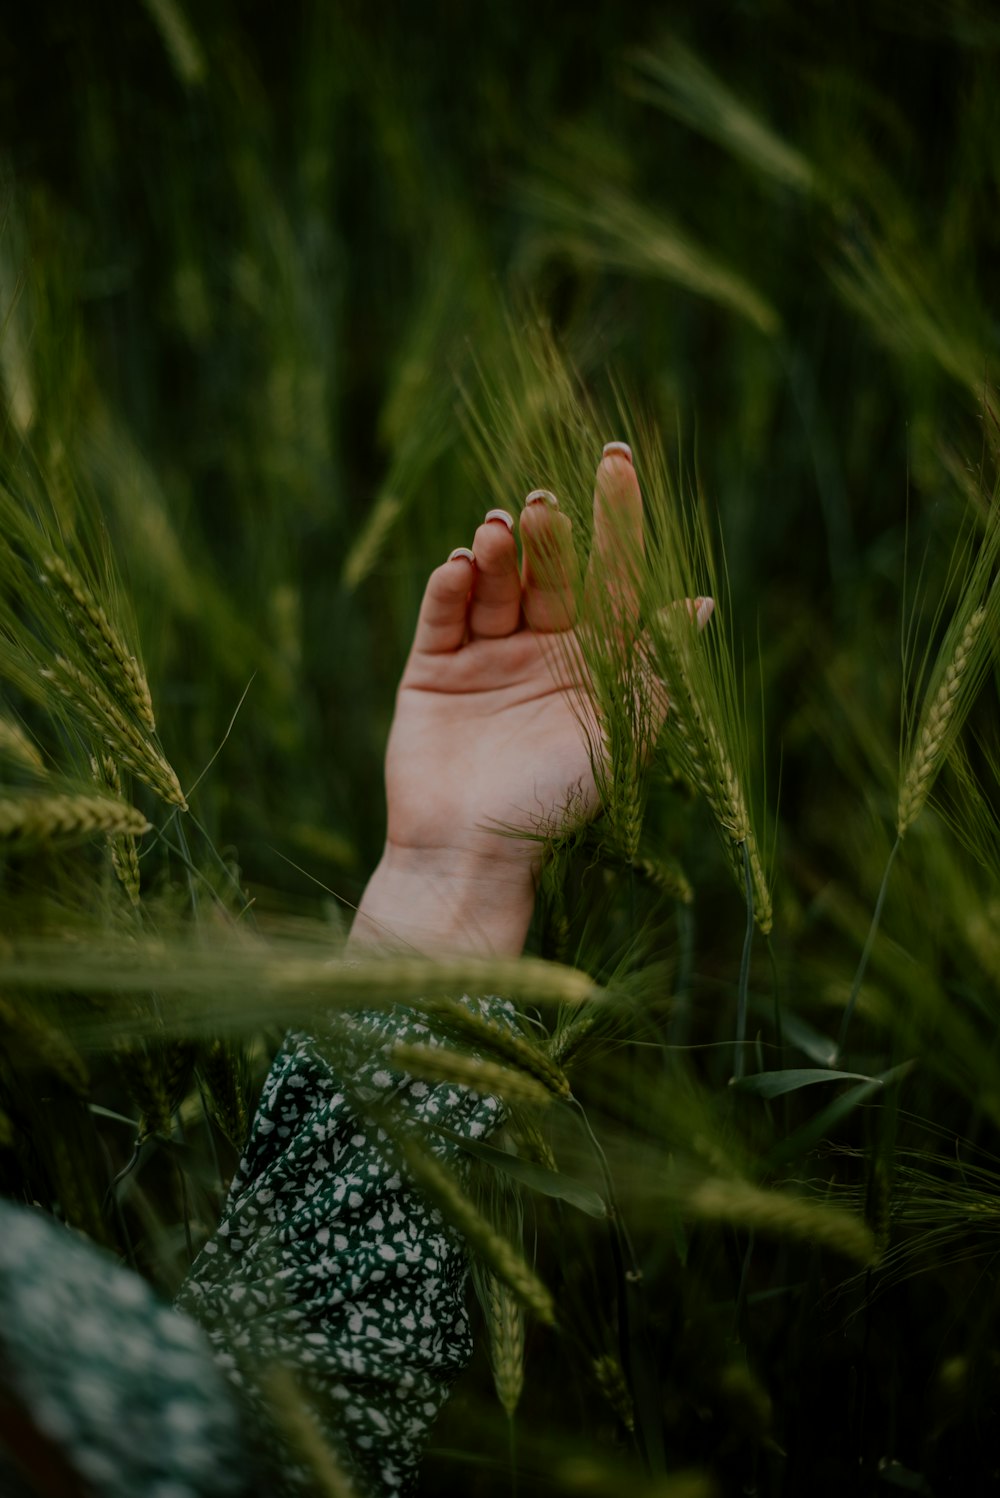 a person's hand in a field of grass